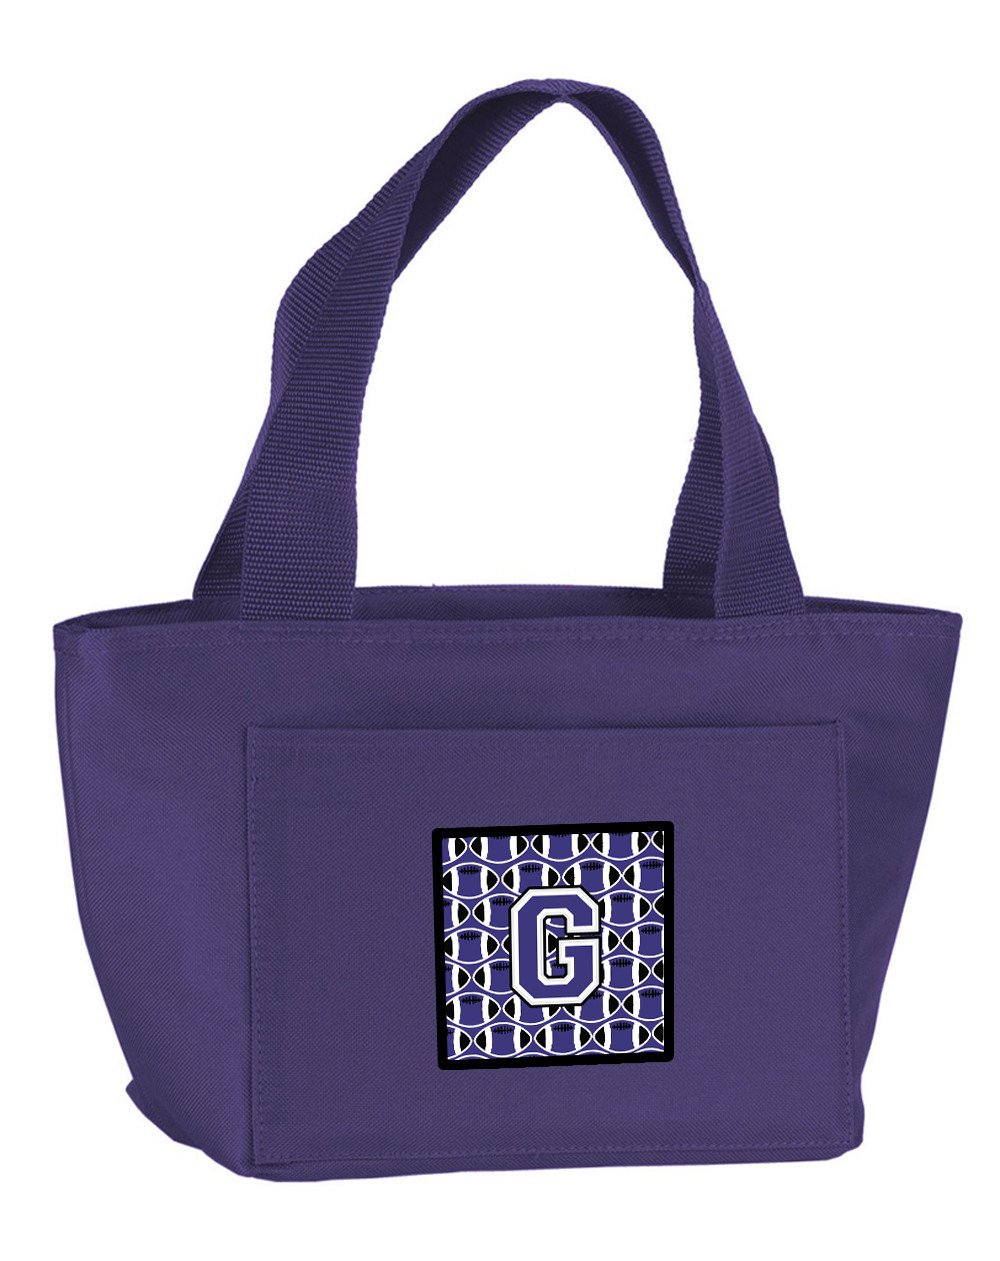 Letter G Football Purple and White Lunch Bag CJ1068-GPR-8808 by Caroline's Treasures